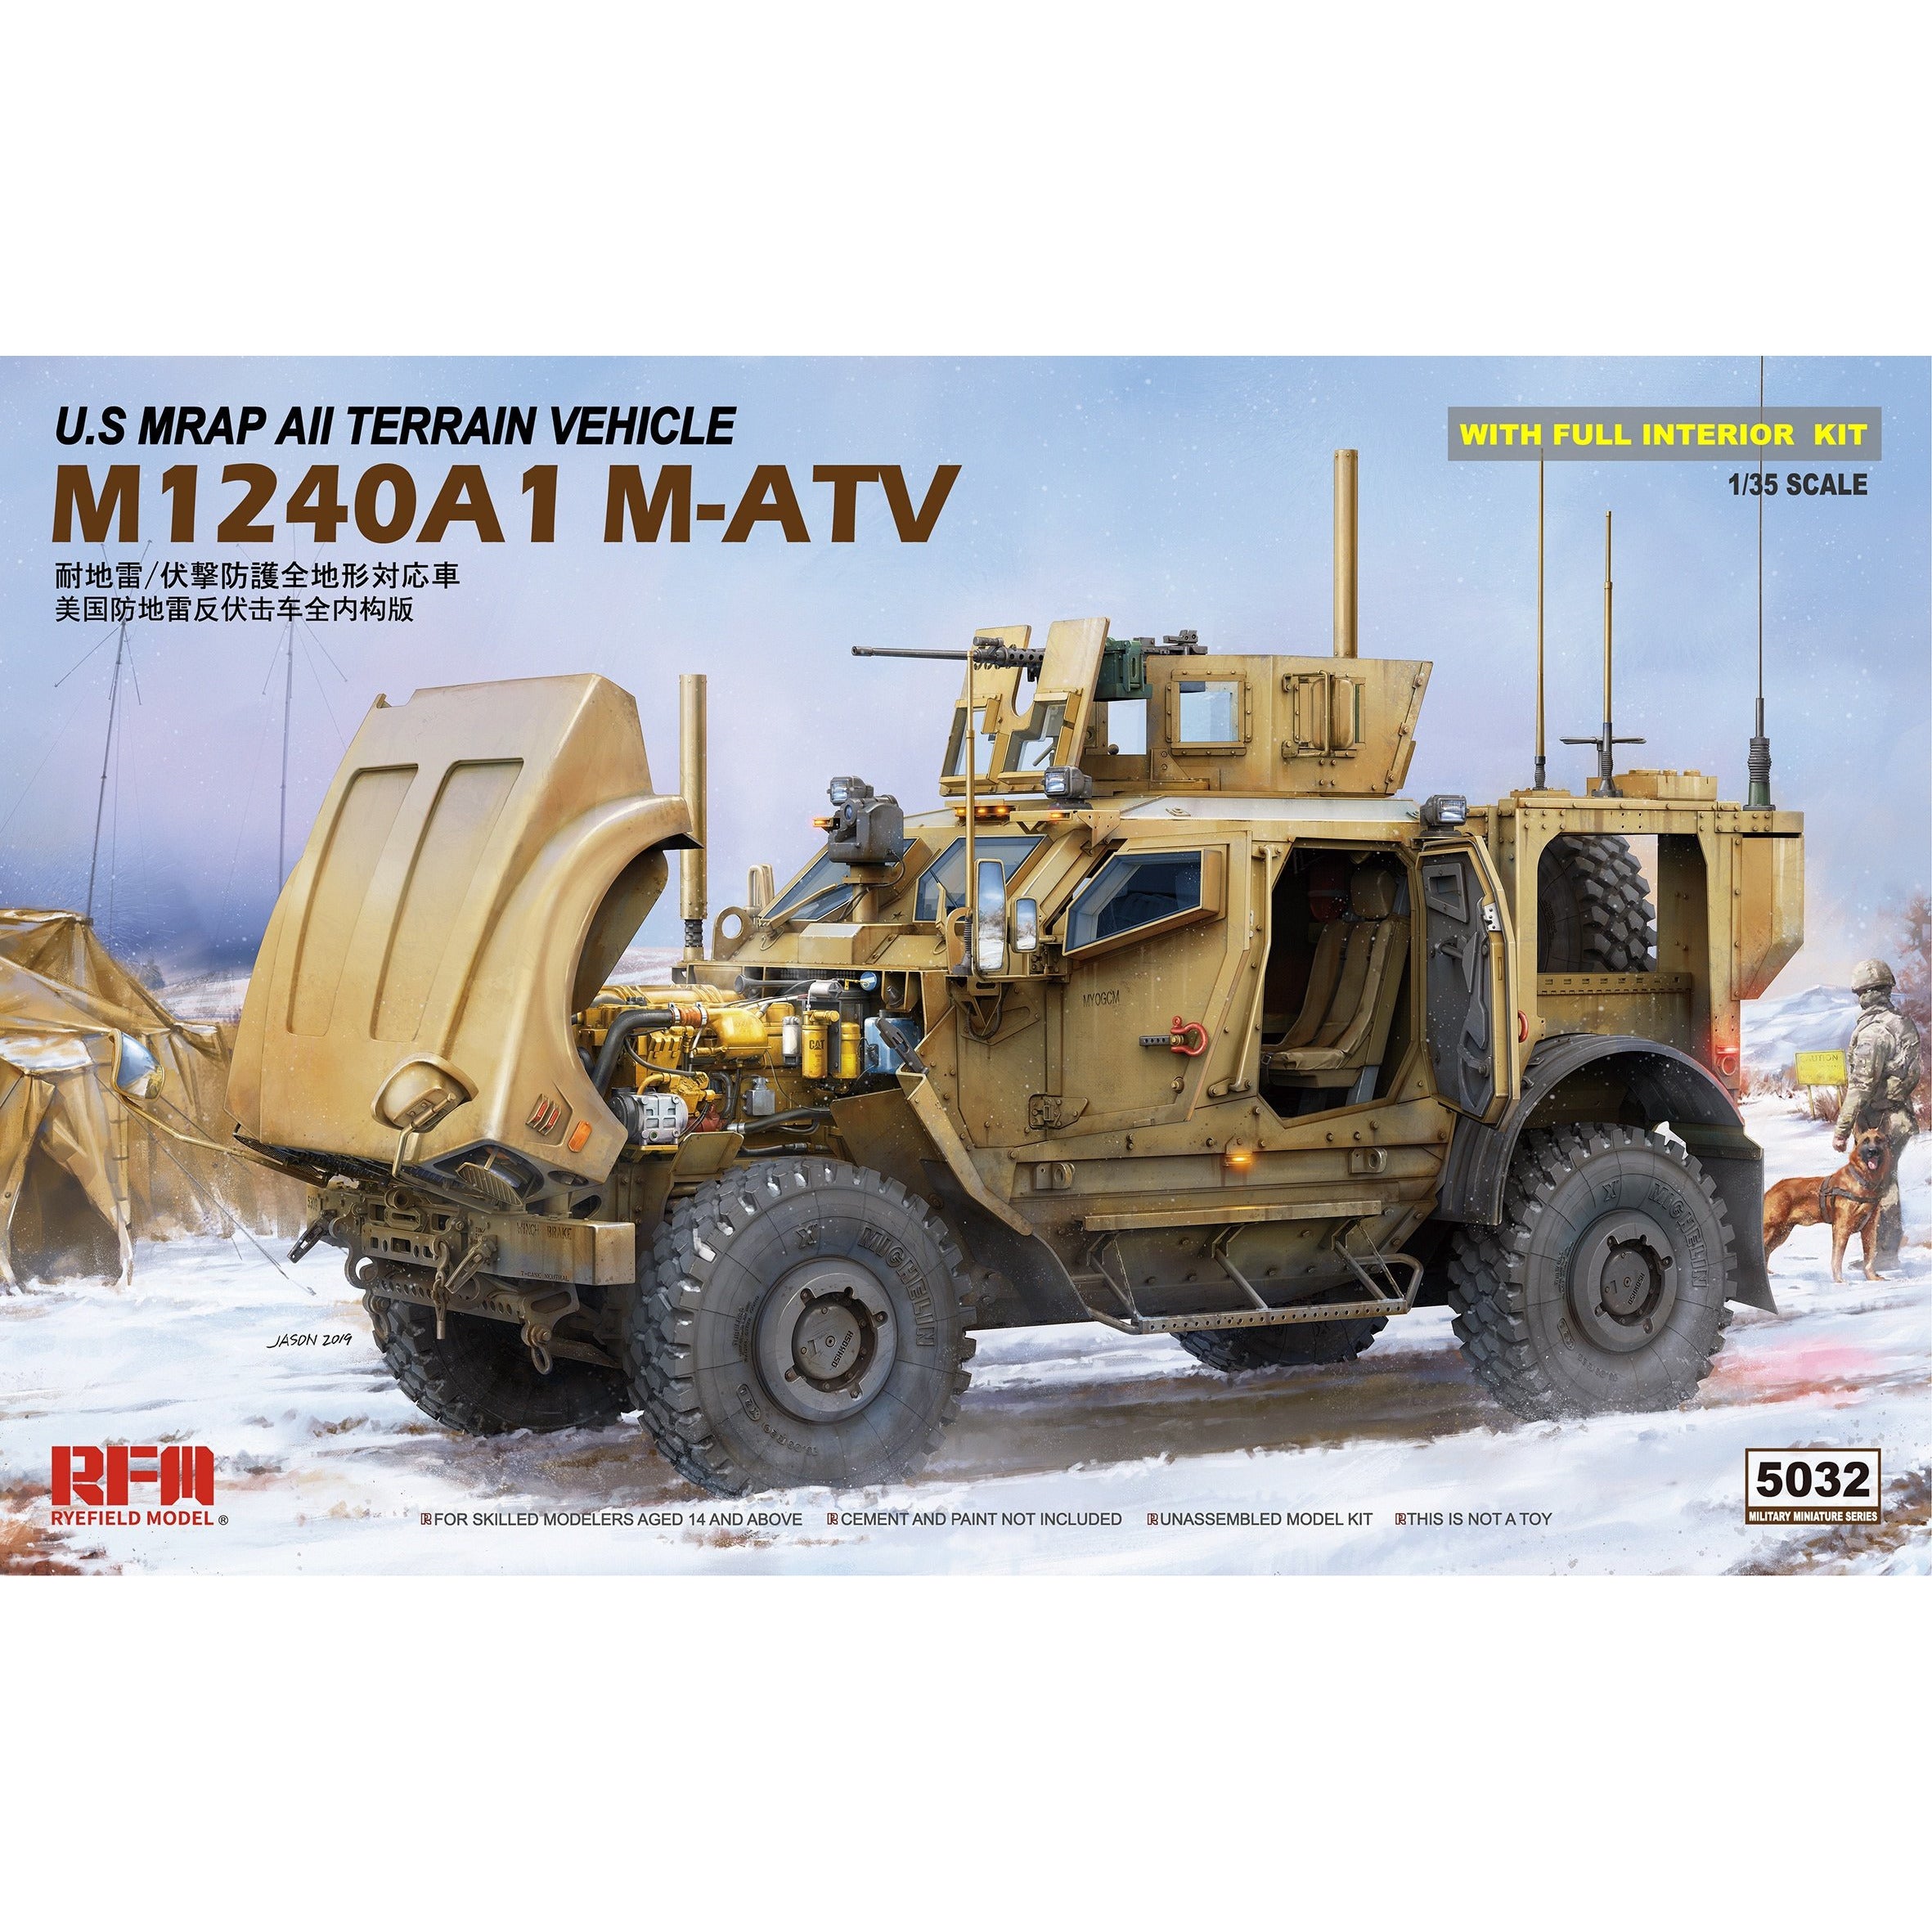 U.S. M151A2 Ford Mutt with M416 Cargo Trailer 1/35 #35130 by